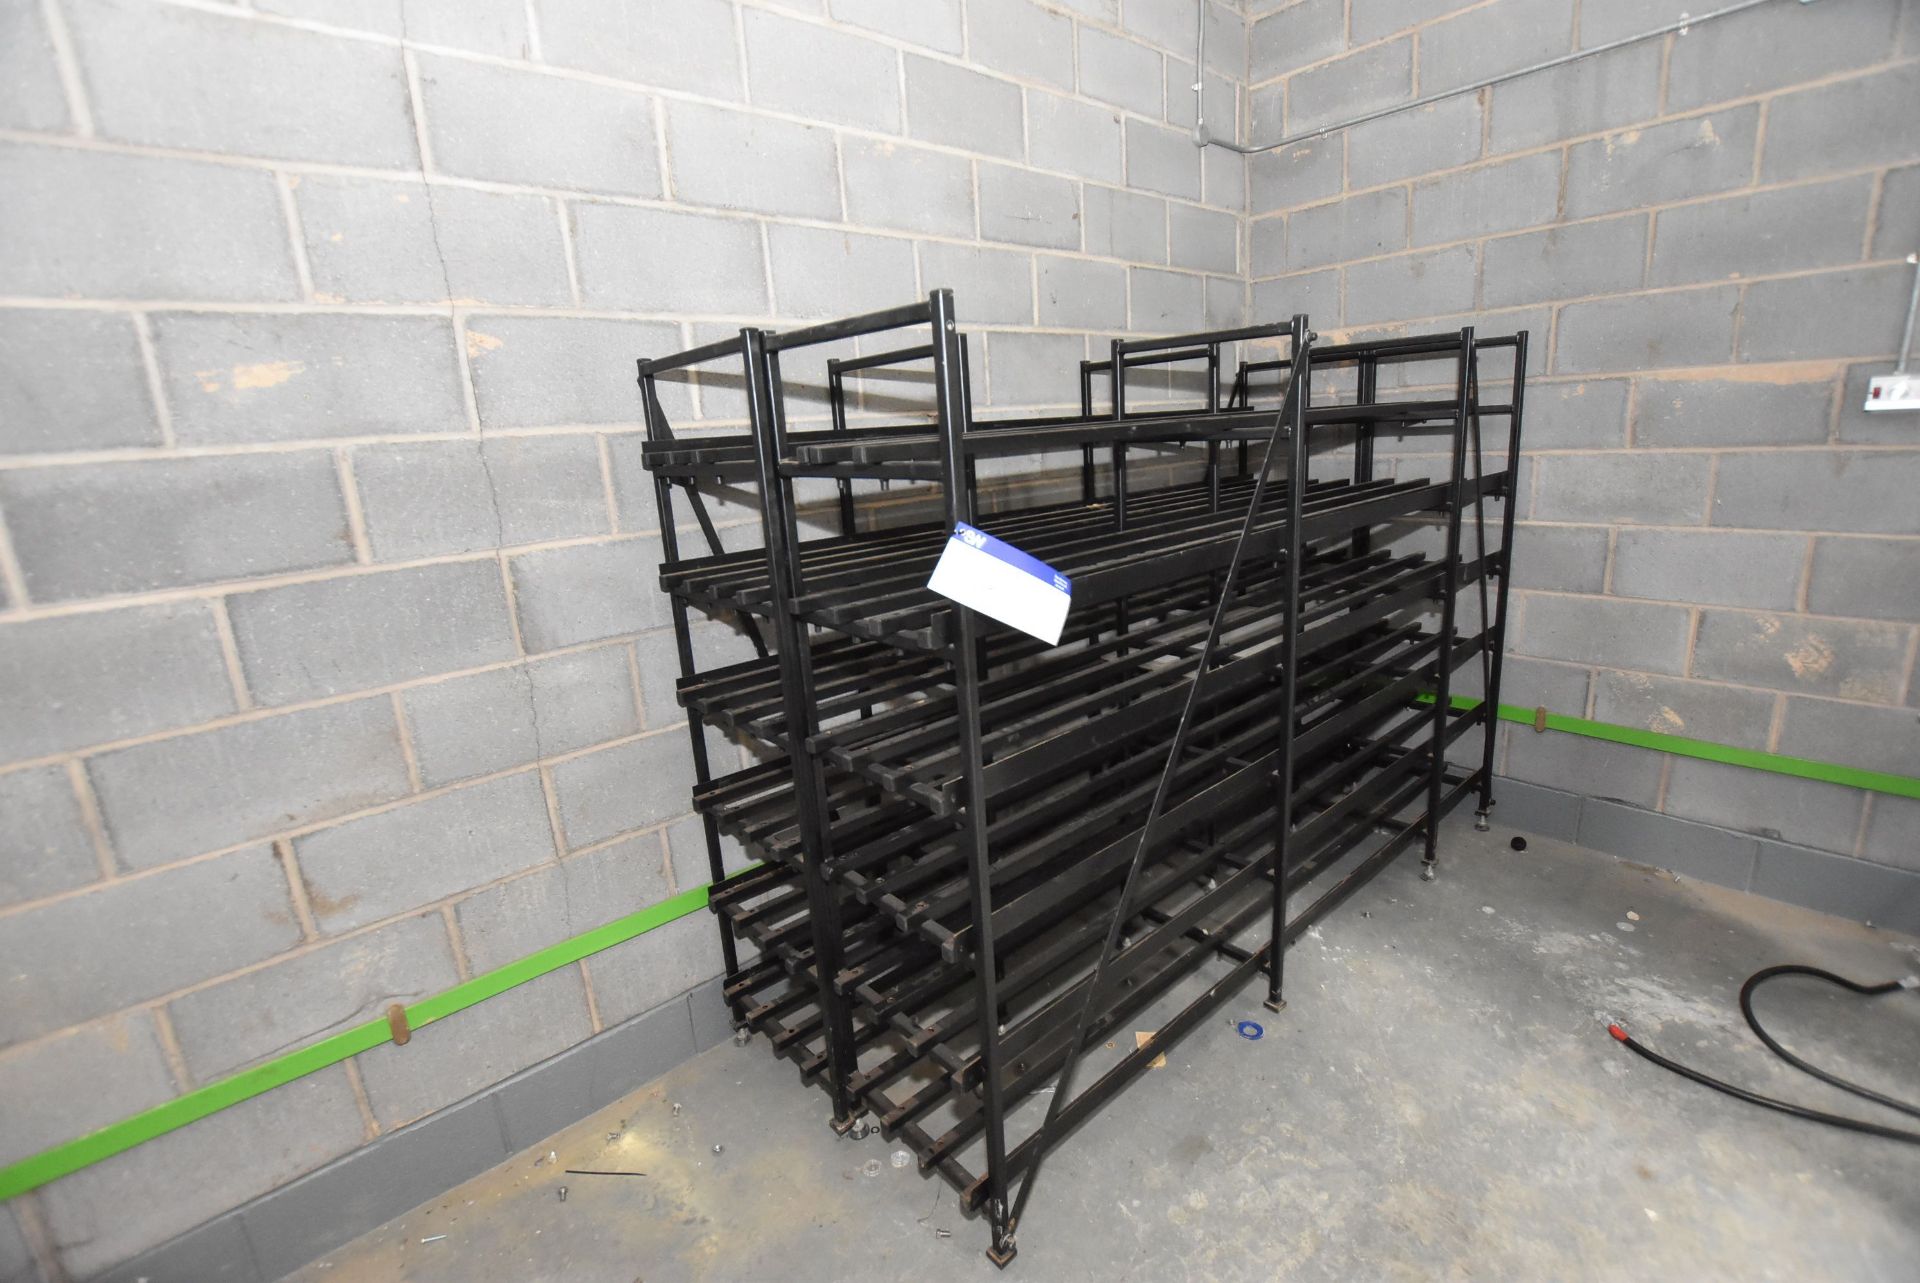 Two Multi-Tier Steel Framed Battery Charging Racks, each approx. 2.4m x 490mm x 1.7m high (There